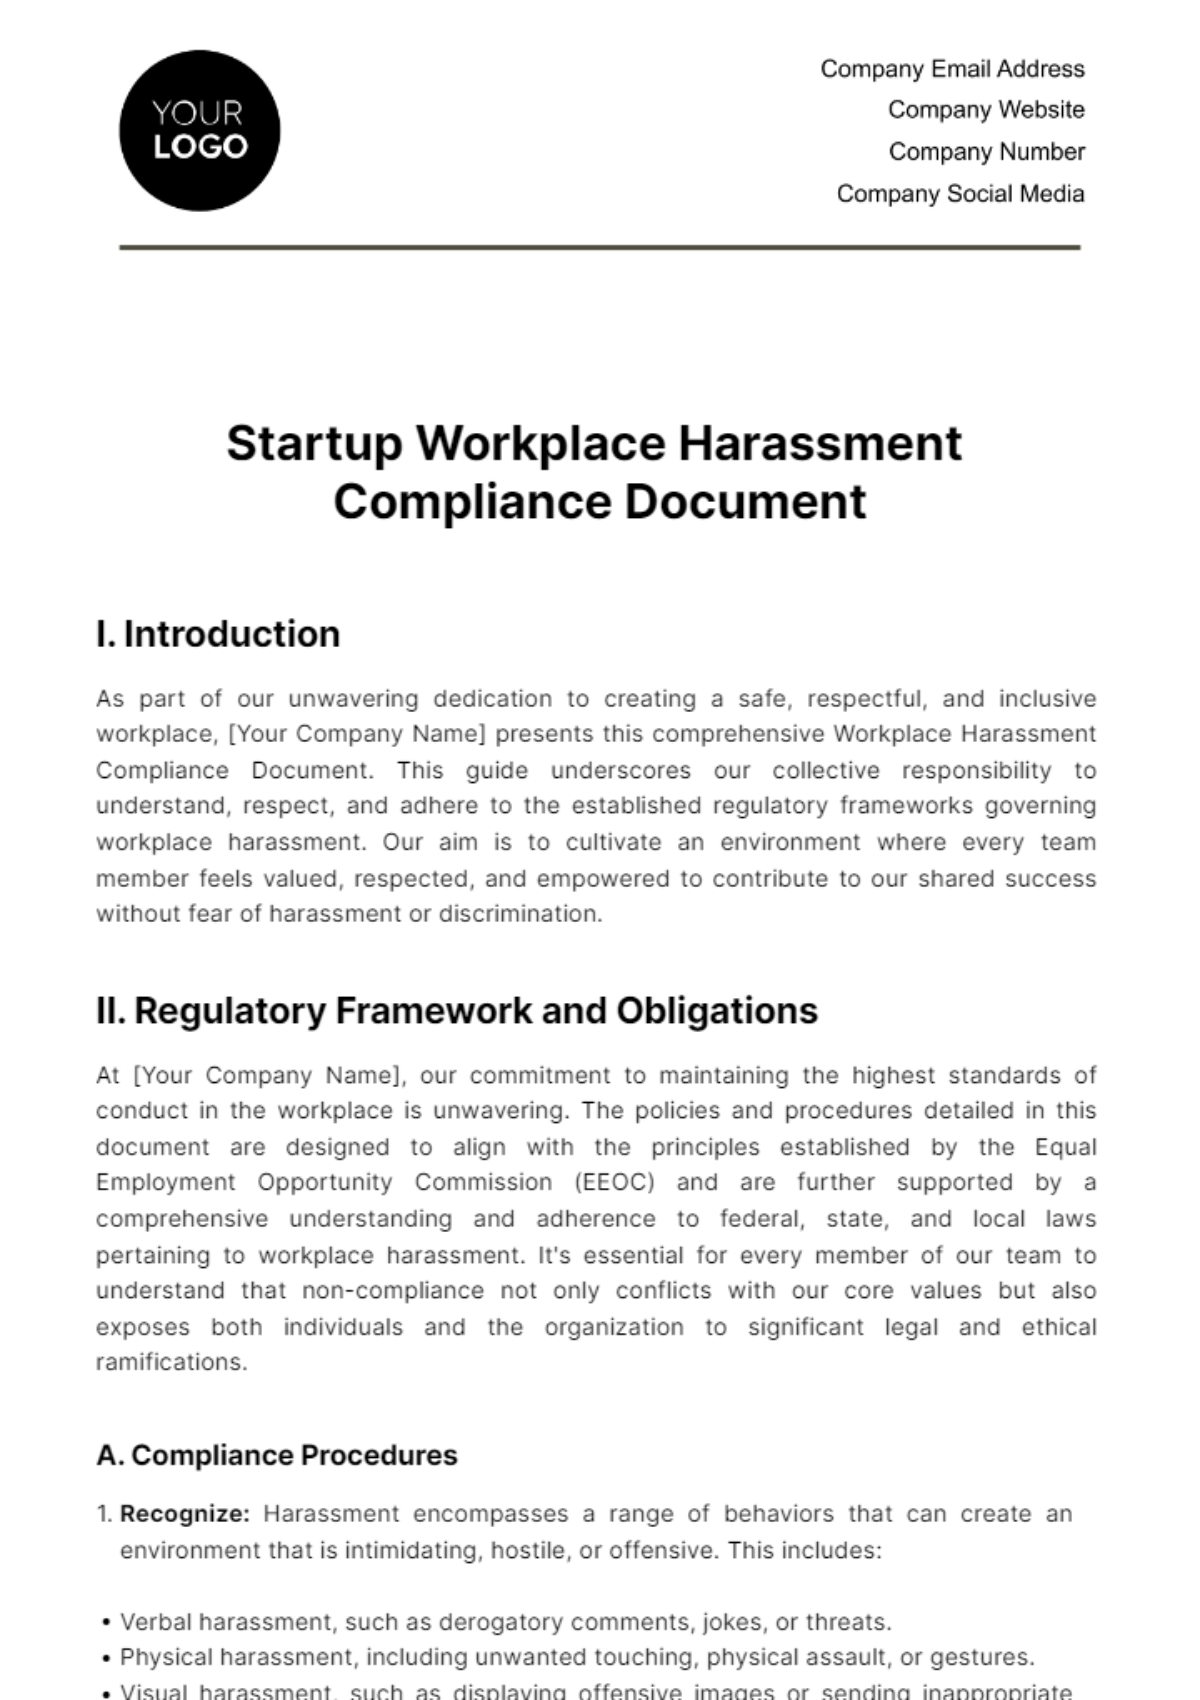 Free Startup Workplace Harassment Compliance Document Template